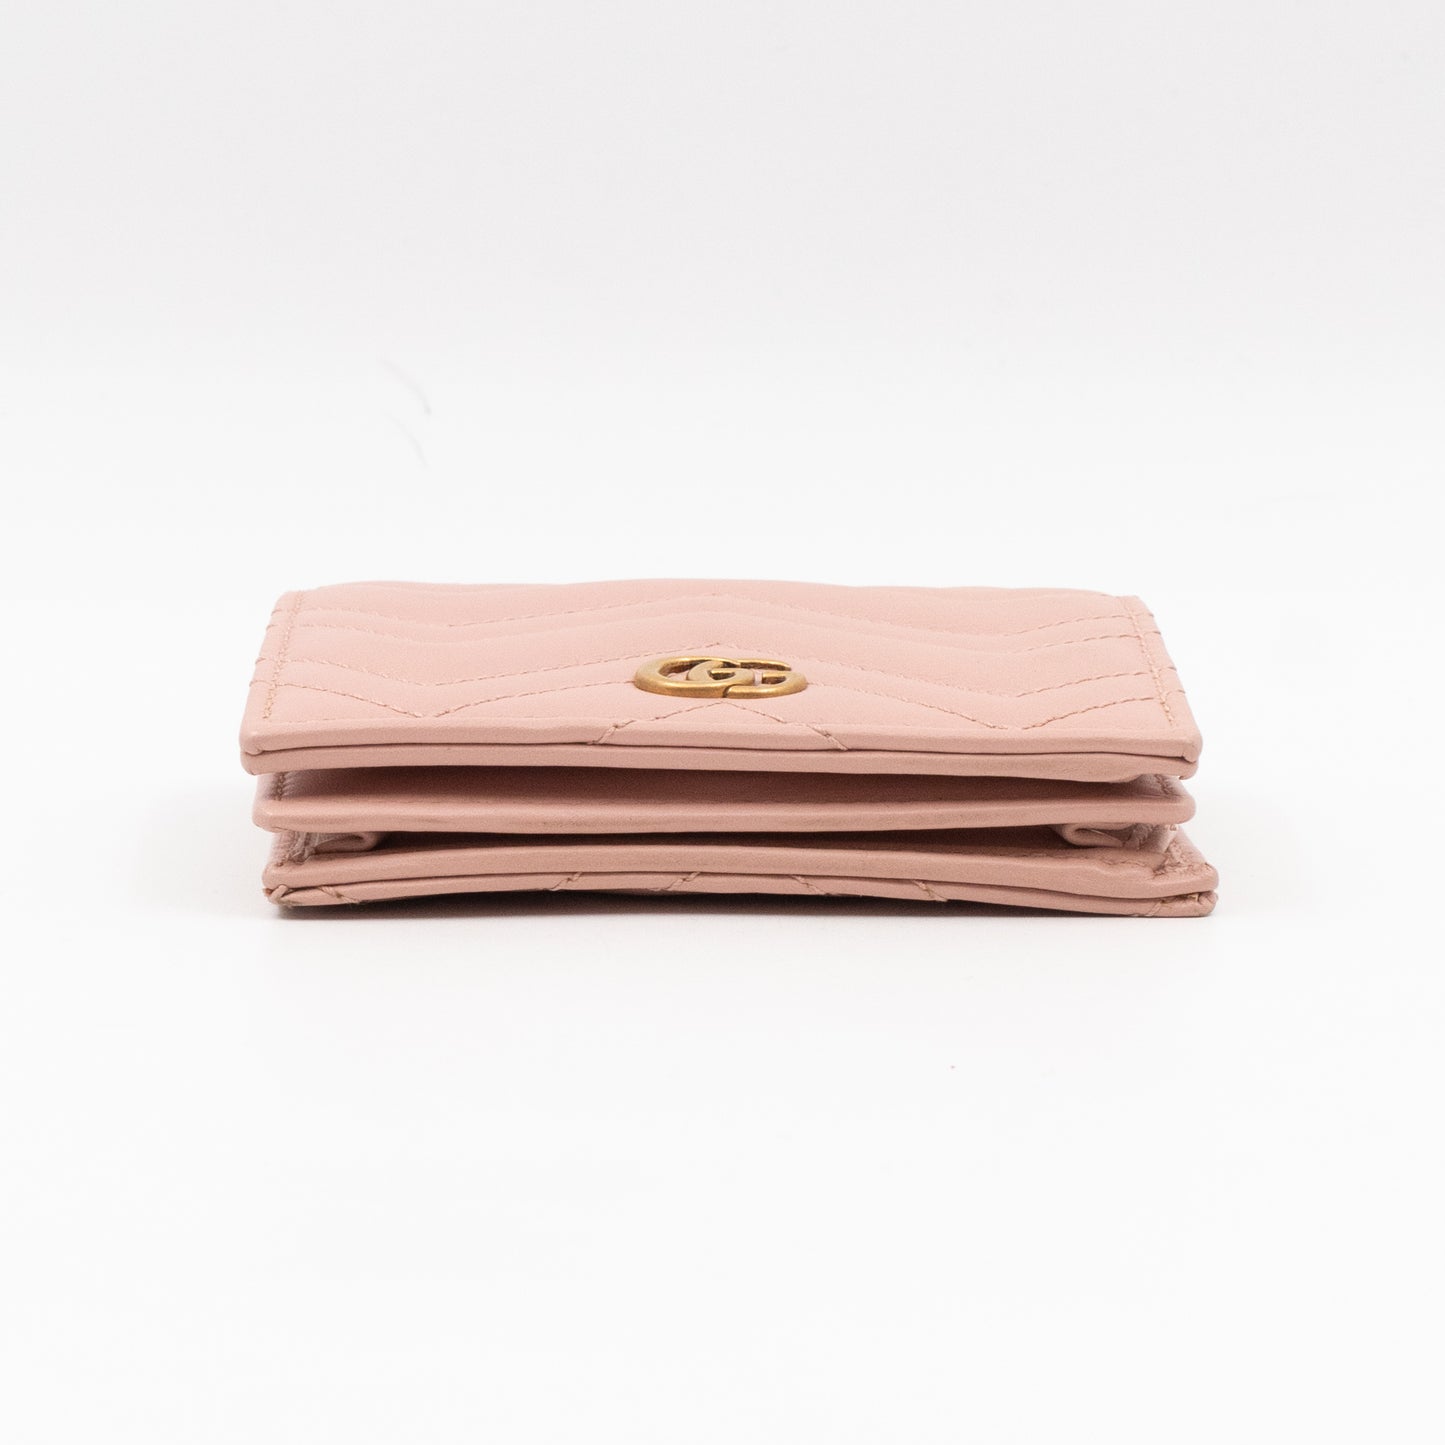 GG Marmont Wallet Matelasse Pink Leather